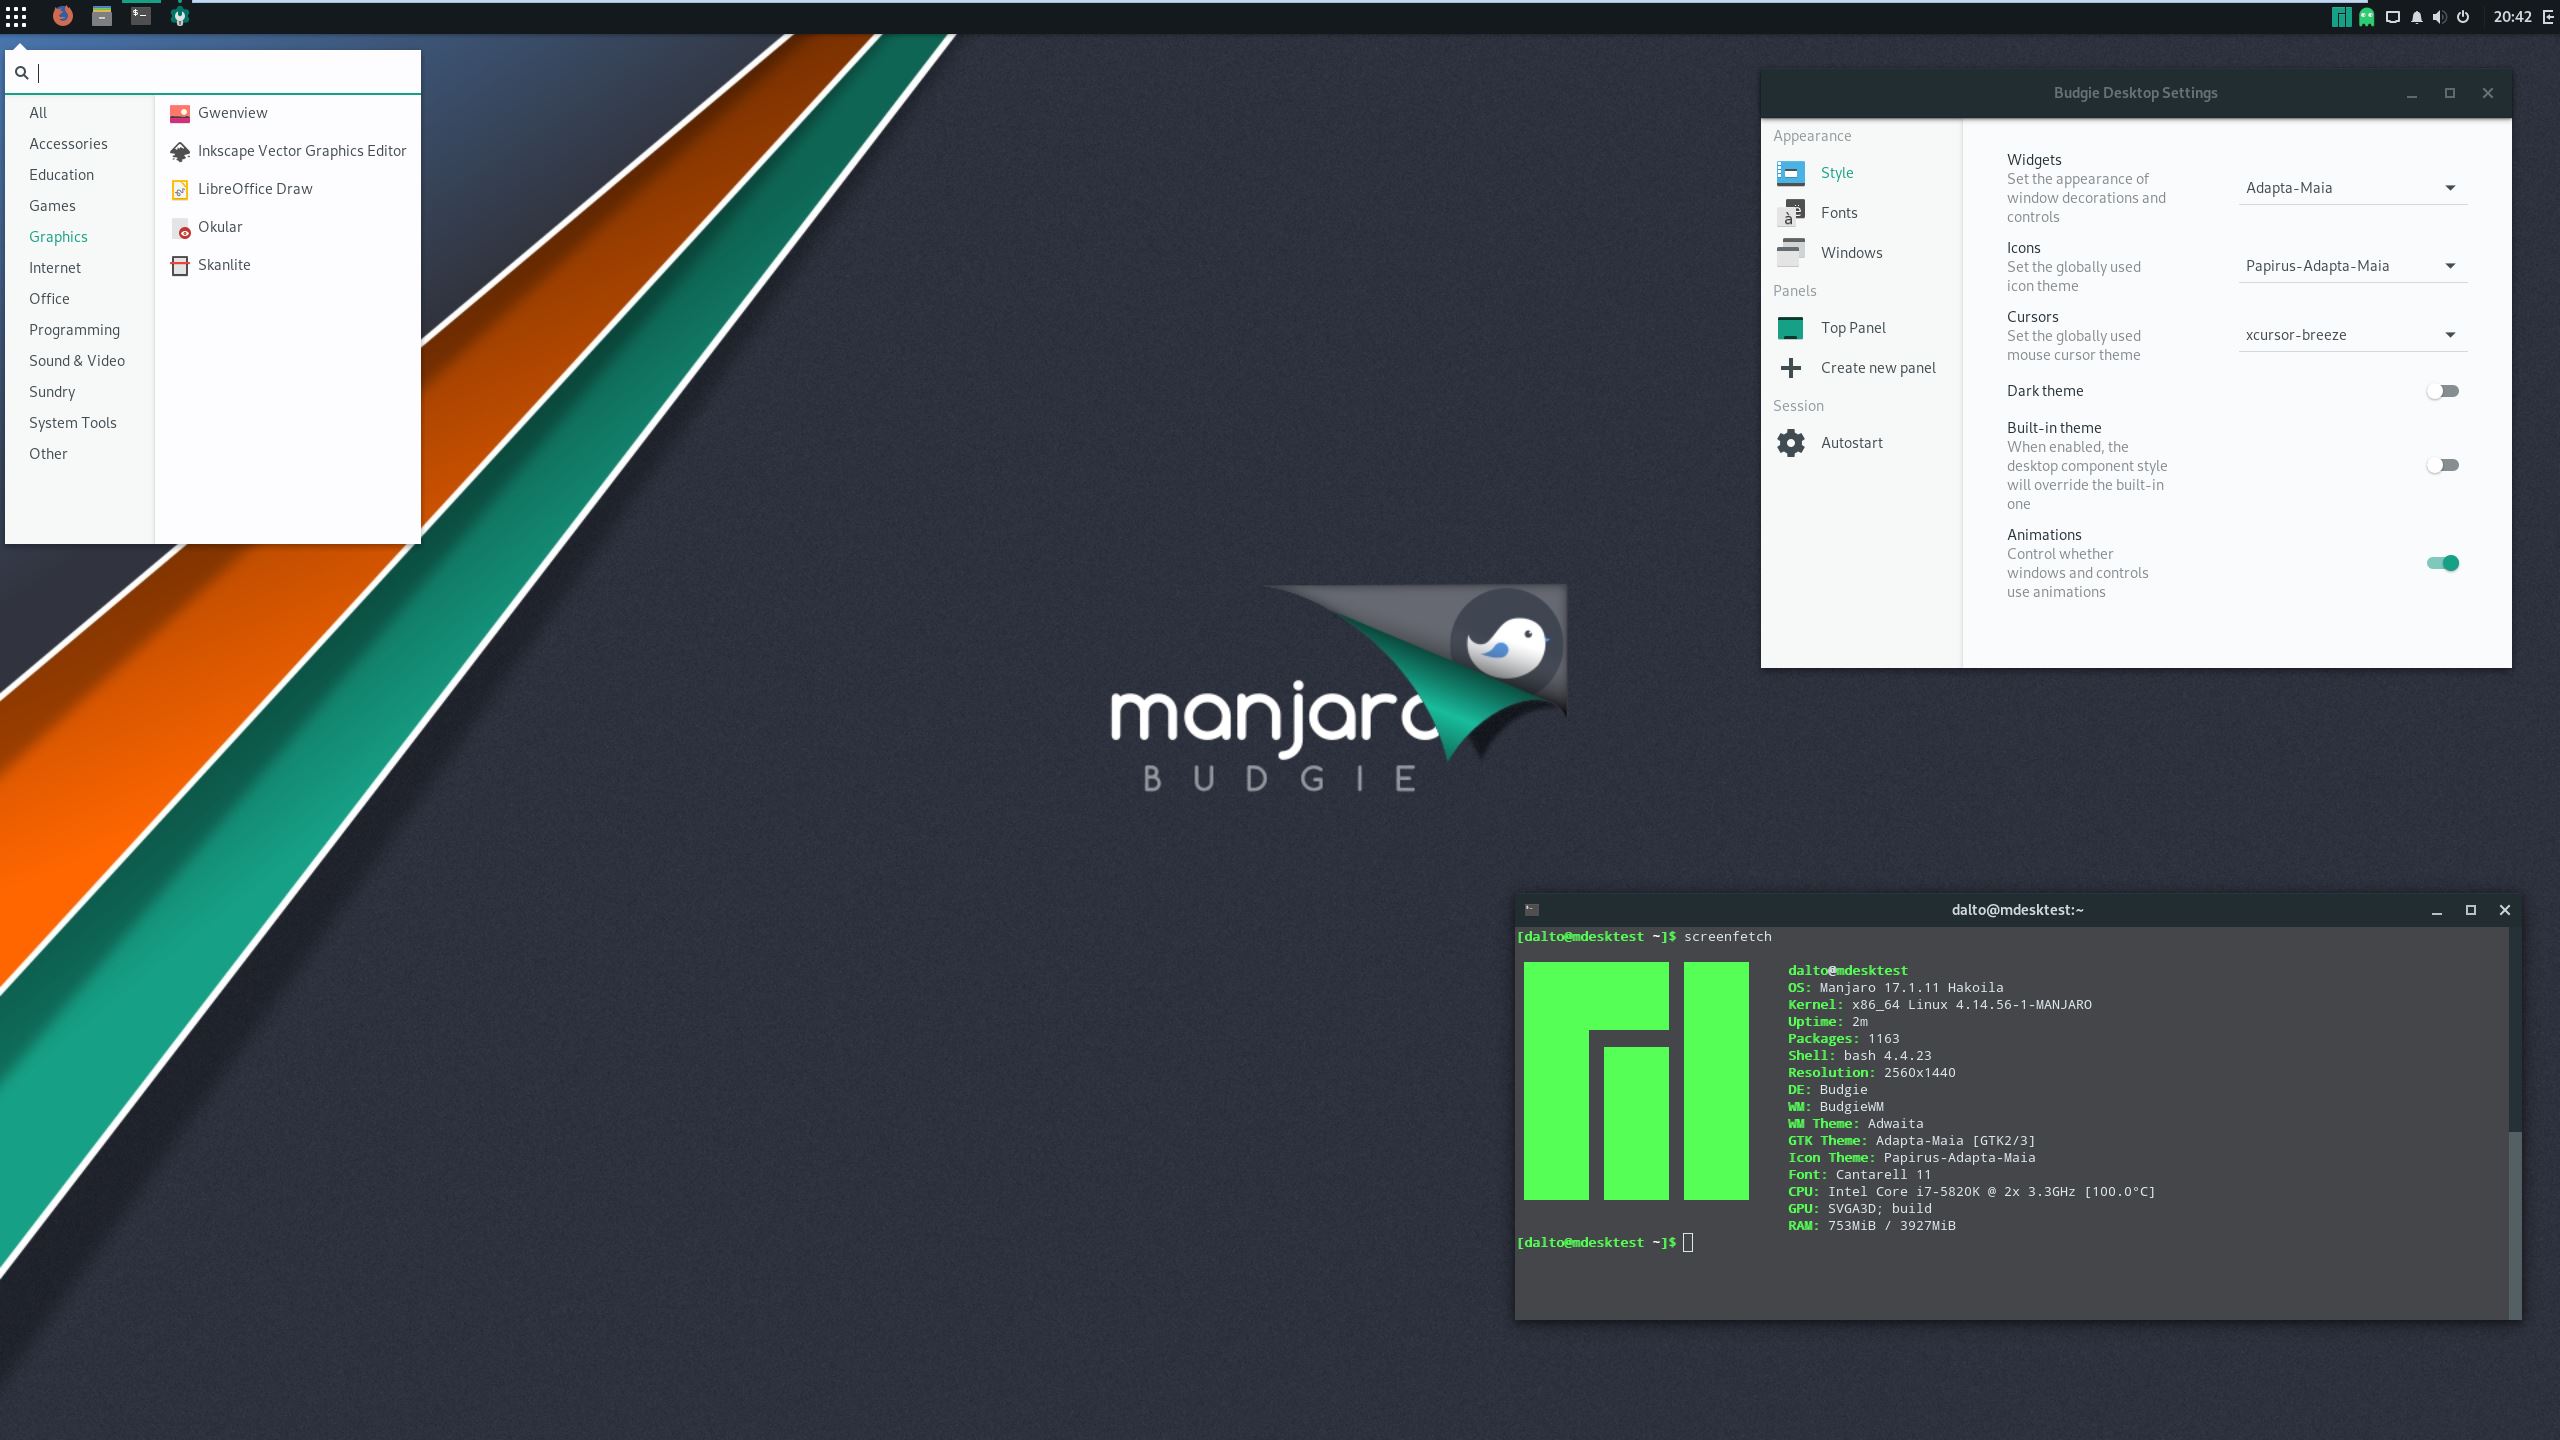 How To Install Budgie Desktop In Manjaro The Linux User